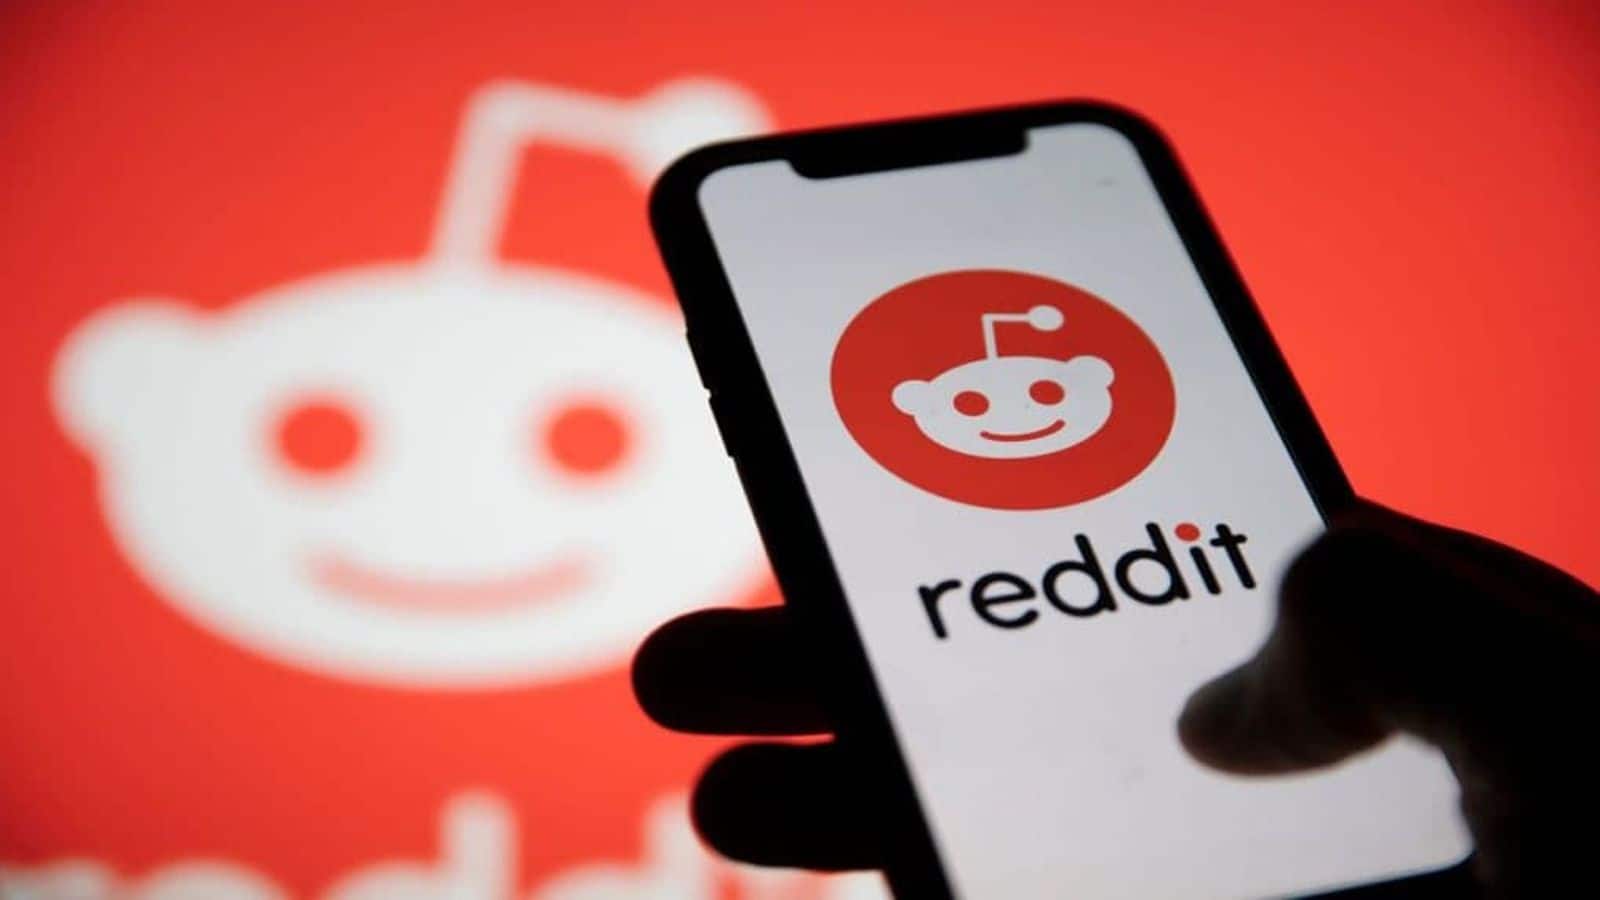 Reddit announces IPO with a valuation target of $6.4 billion